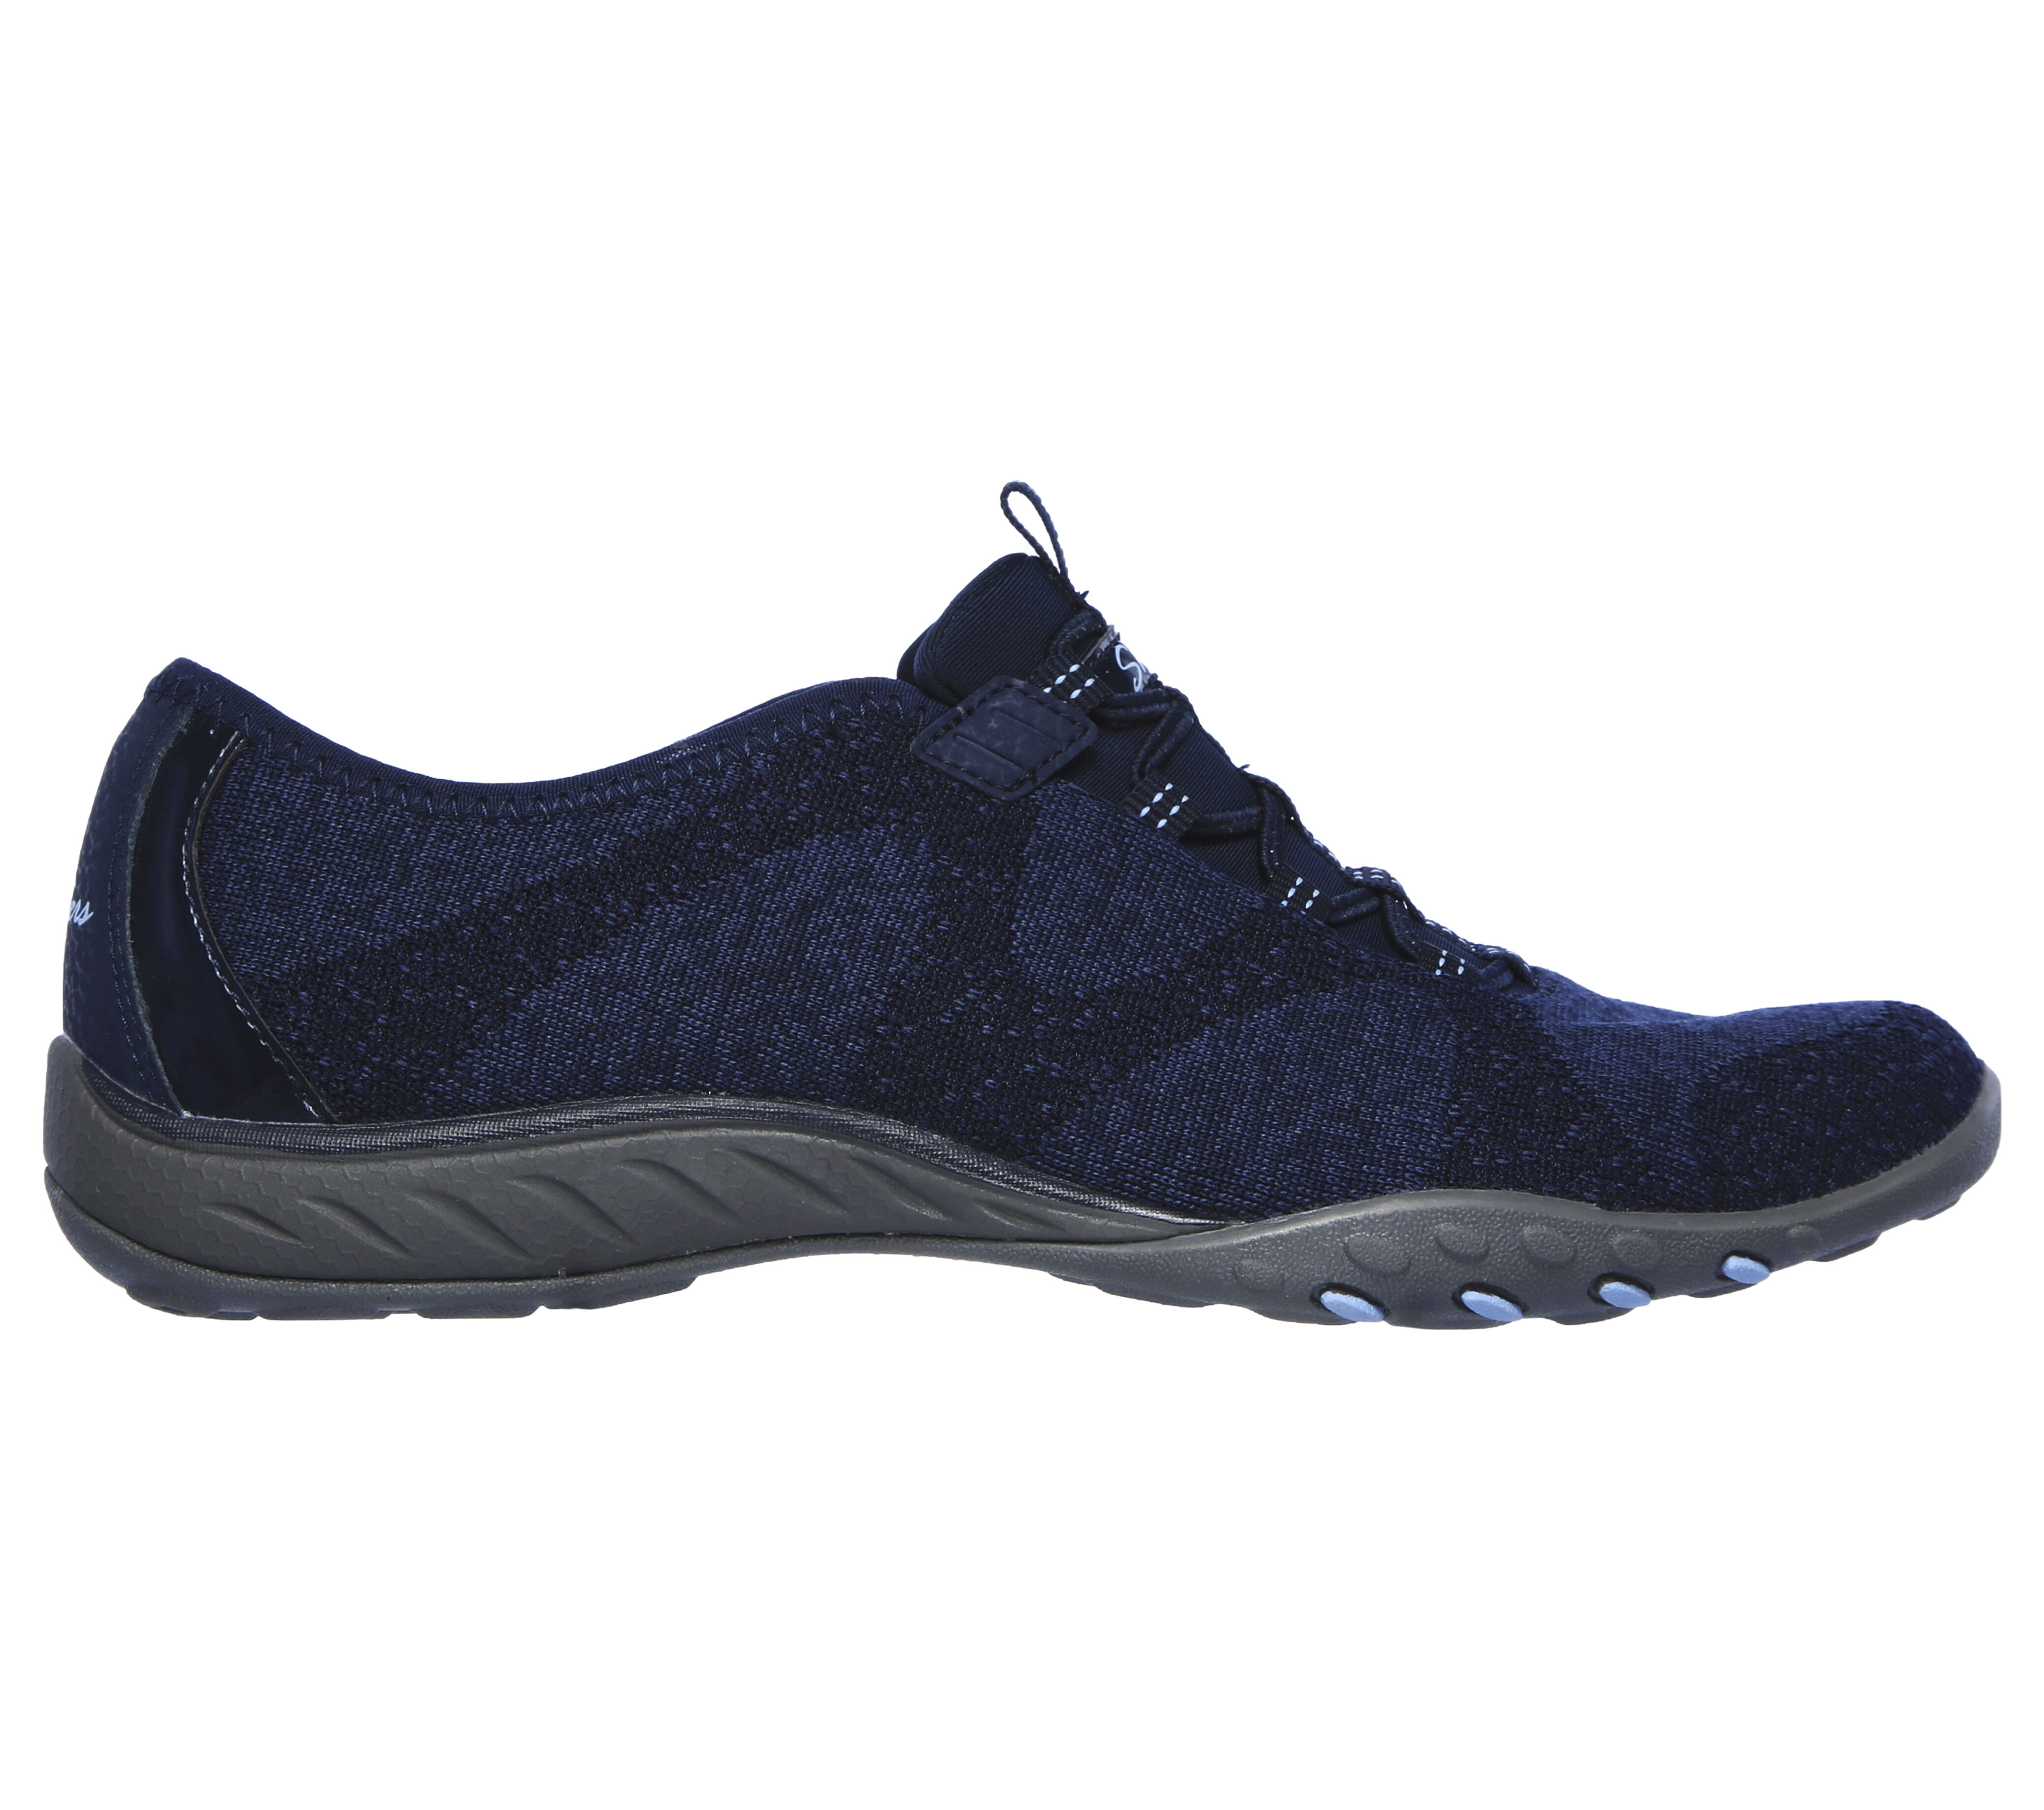 skechers relaxed fit breathe easy just relax